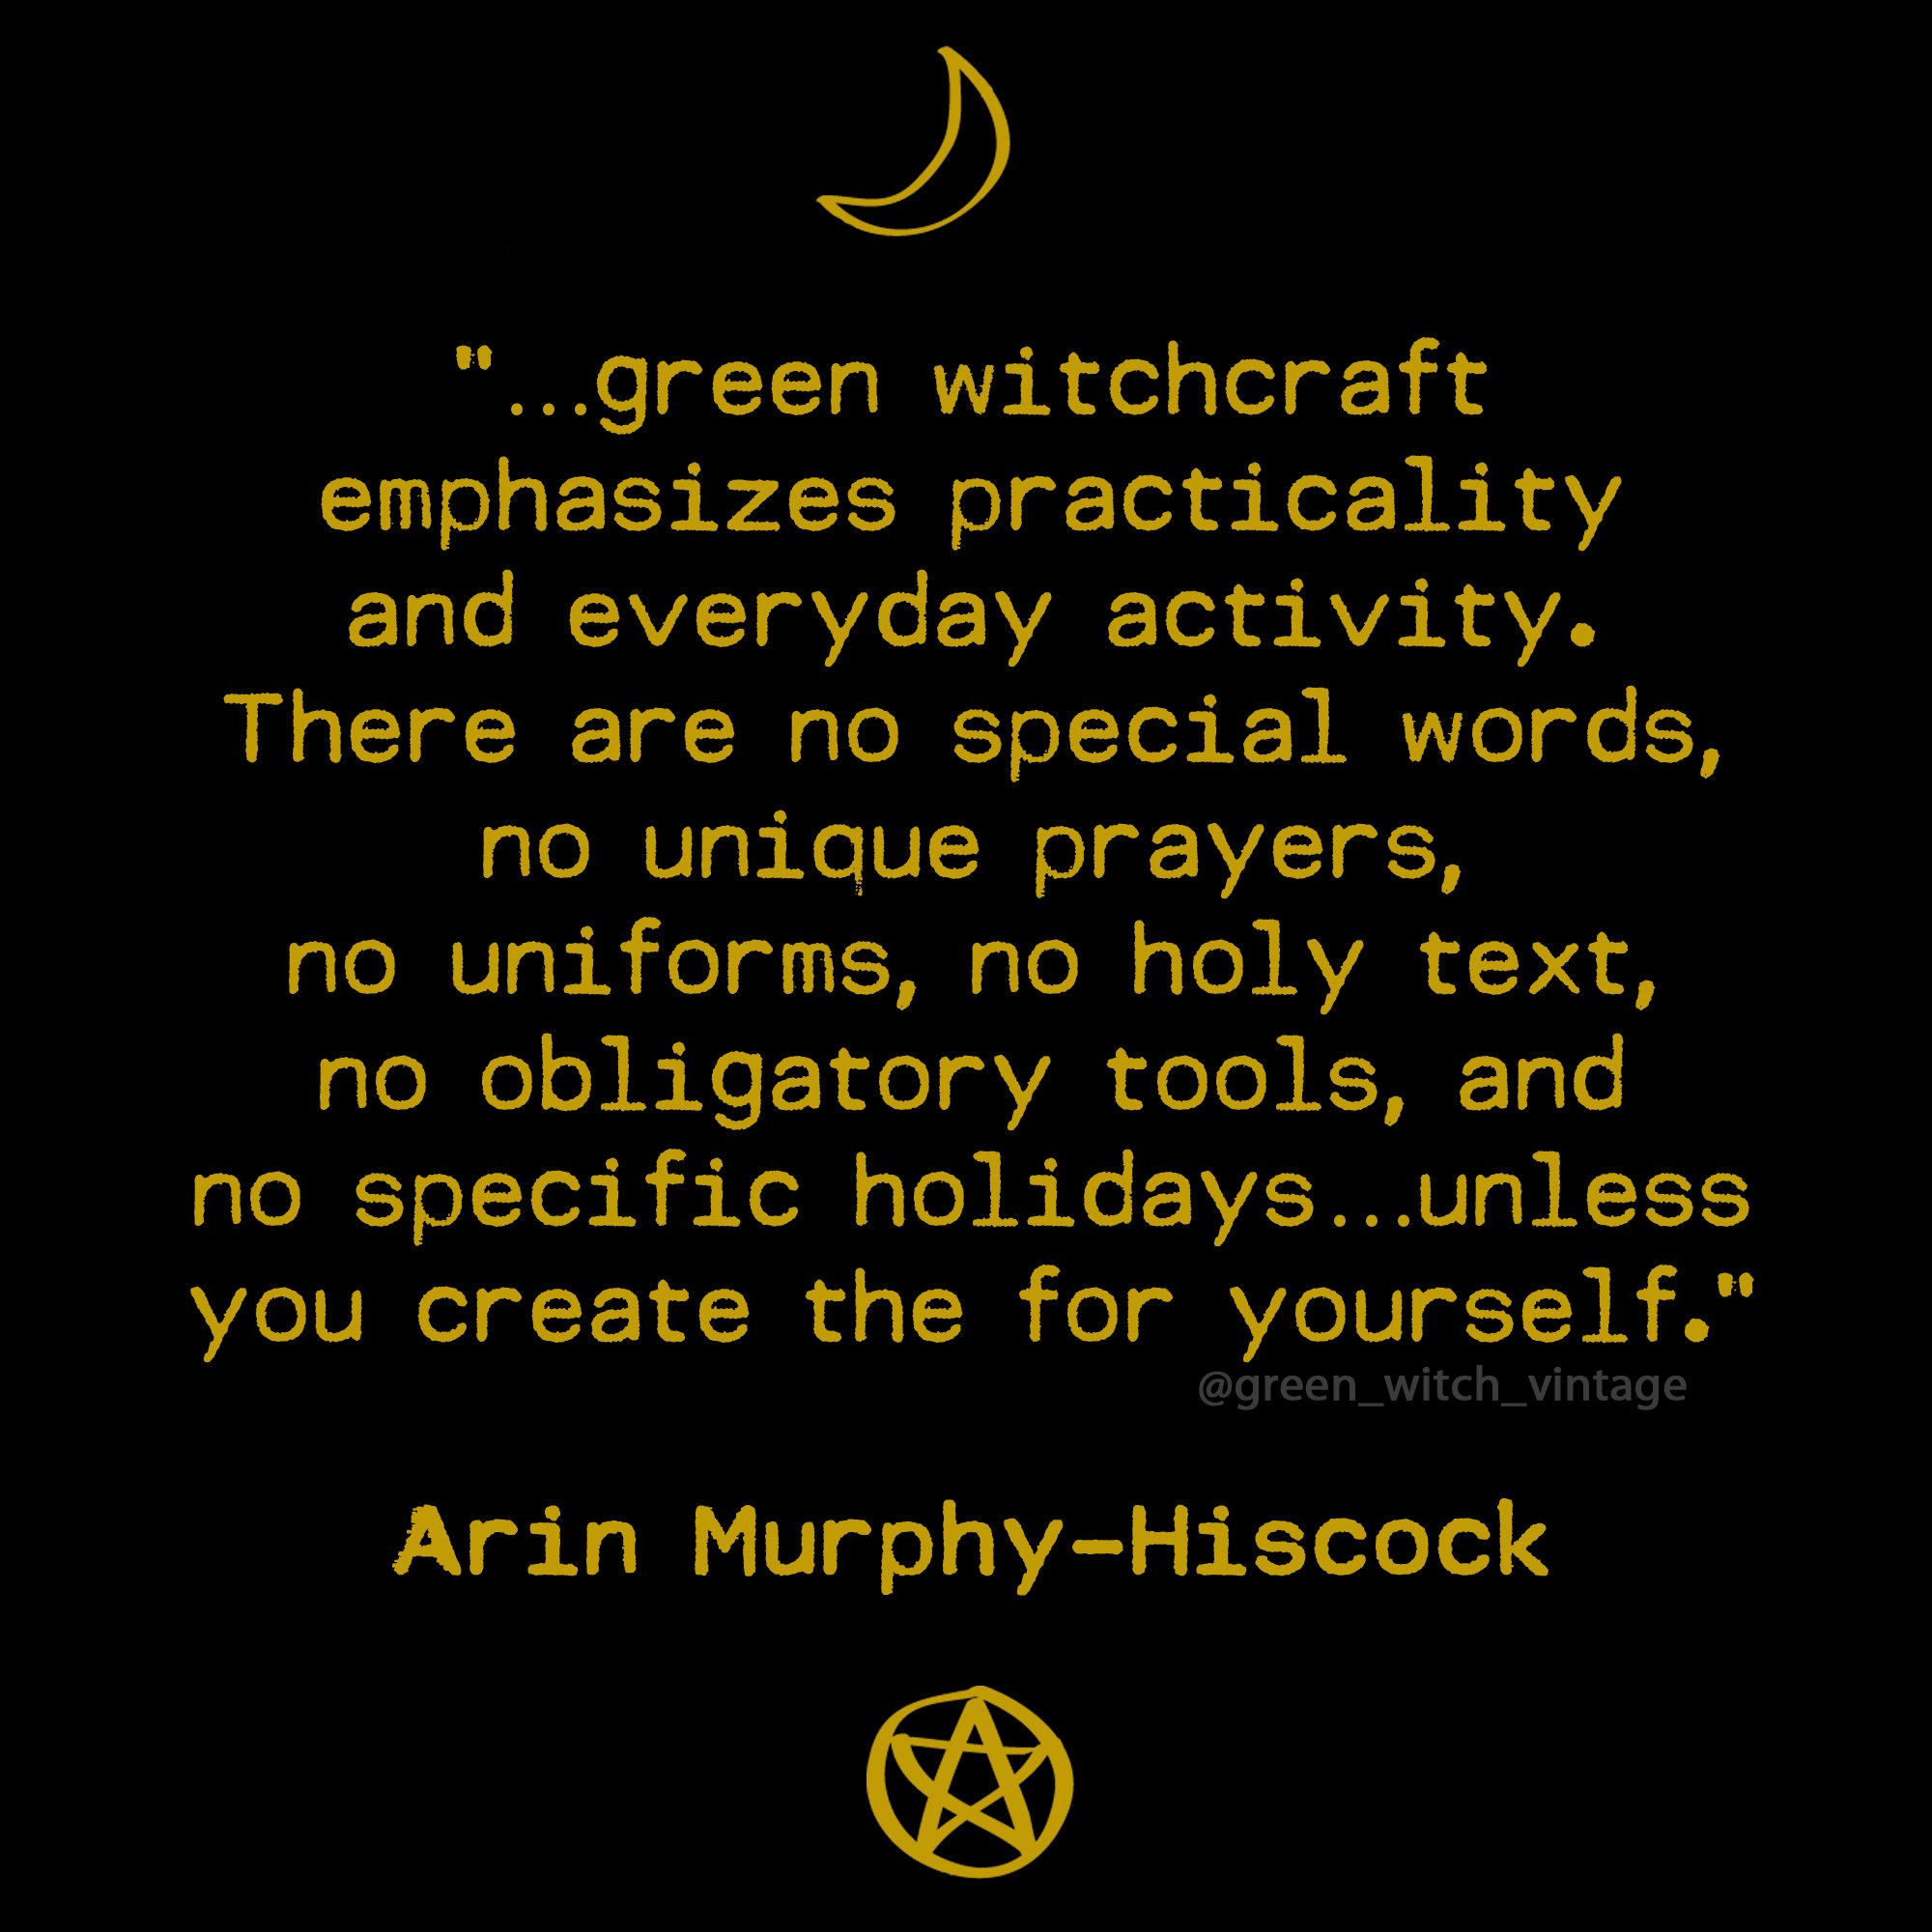 #arinmurphyhiscock #murphyhiscockquote #quotes #witchyquotes #paganquotes #naturequotes #greenwitchquotes #qotd #magicquote #greenwitchquote